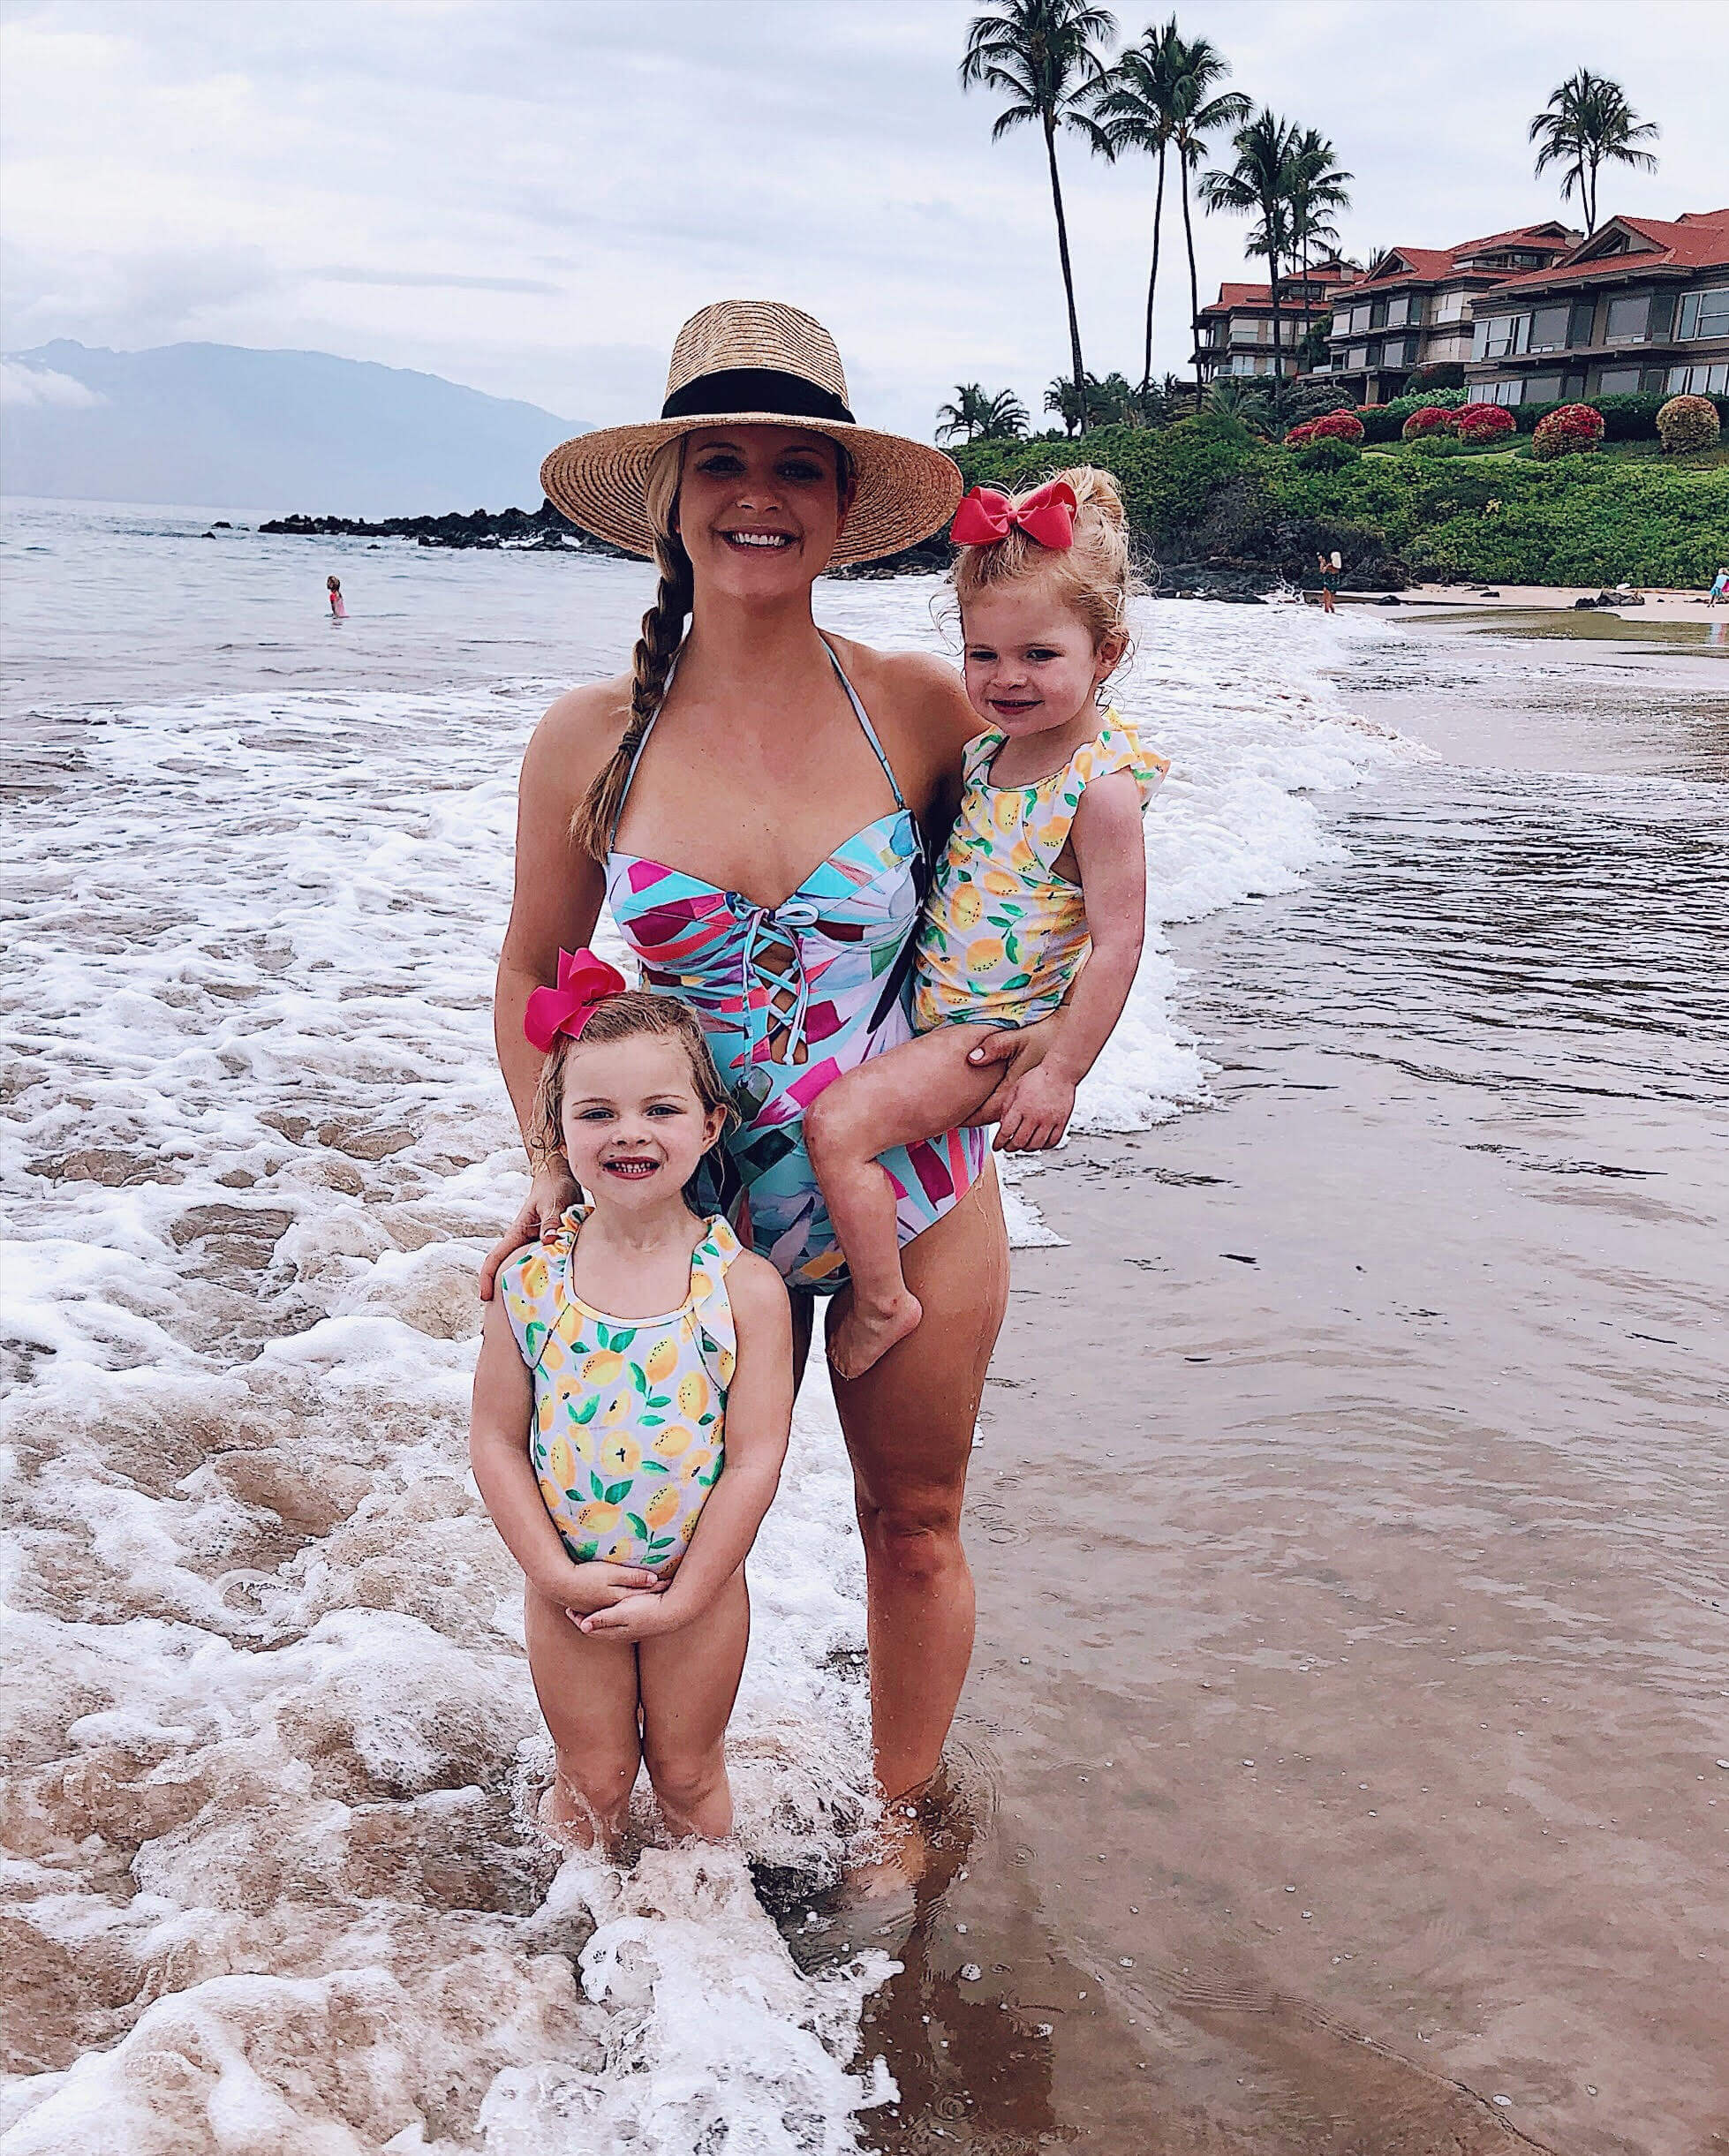 mom and daughter swimsuits - Packing For Maui by popular South Carolina travel blogger, The Southern Style Guide